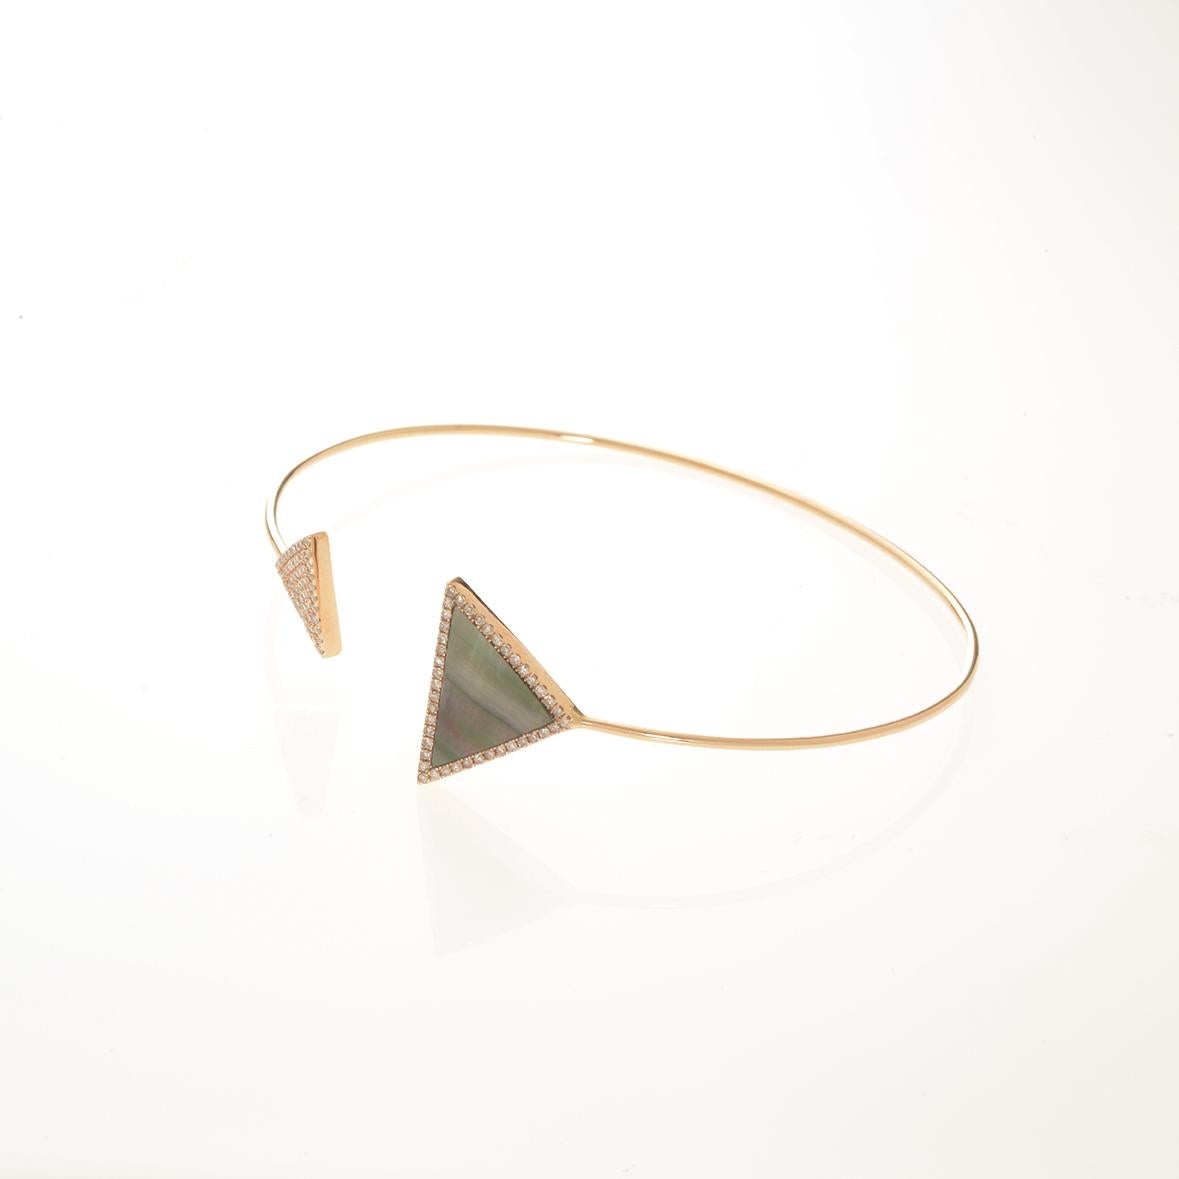 Pave diamonds (0.21 ctw) and rose mother of pearl (4.06 ct) triangle bangle in 18k yellow gold

Flexible bangle

60mm diameter